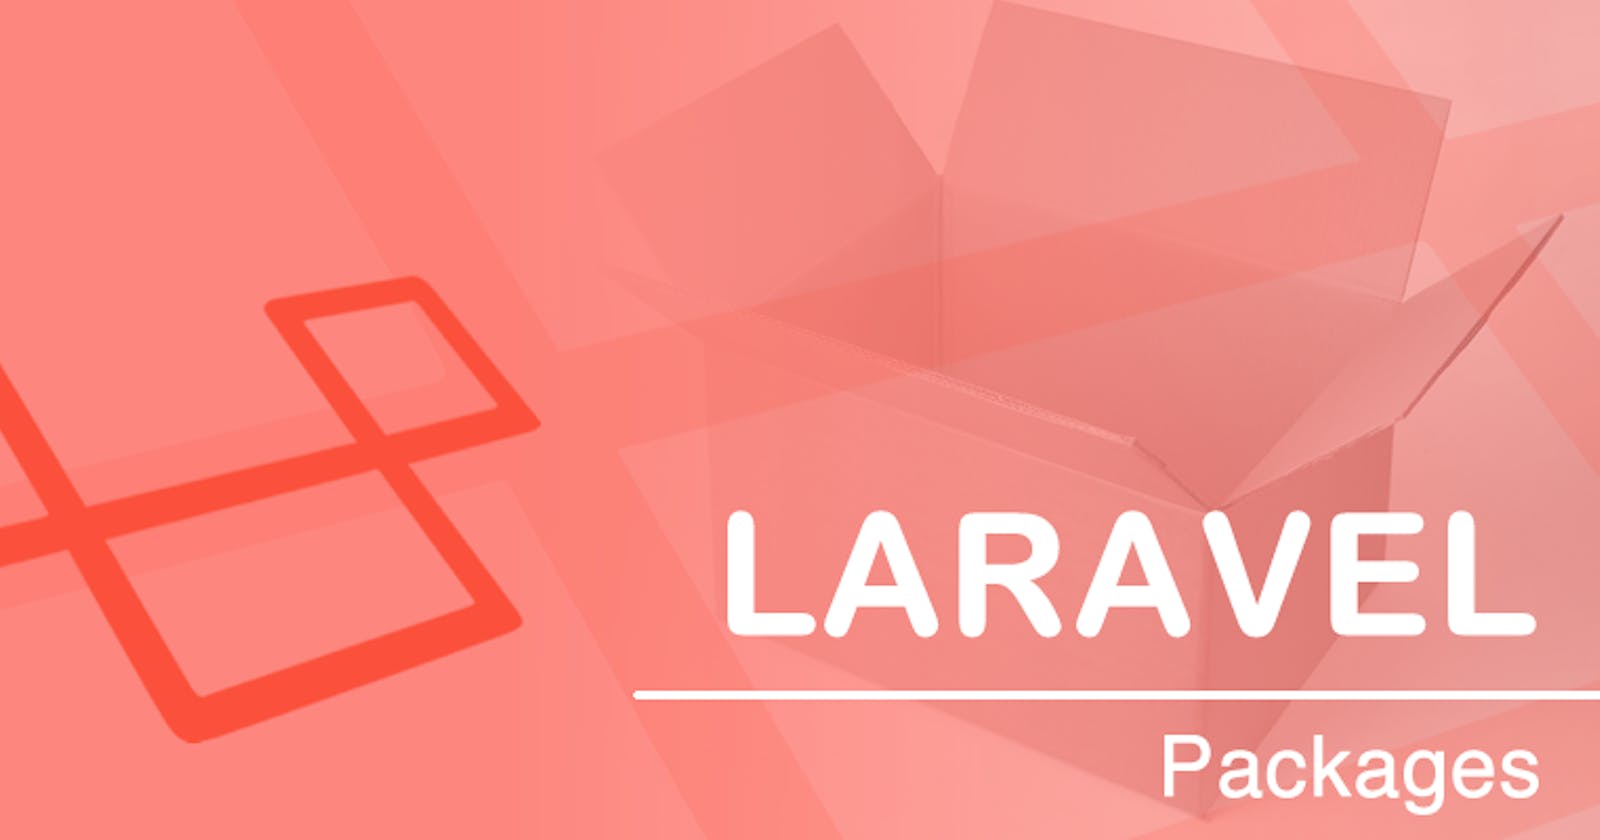 Laravel Packages - How to build and deploy